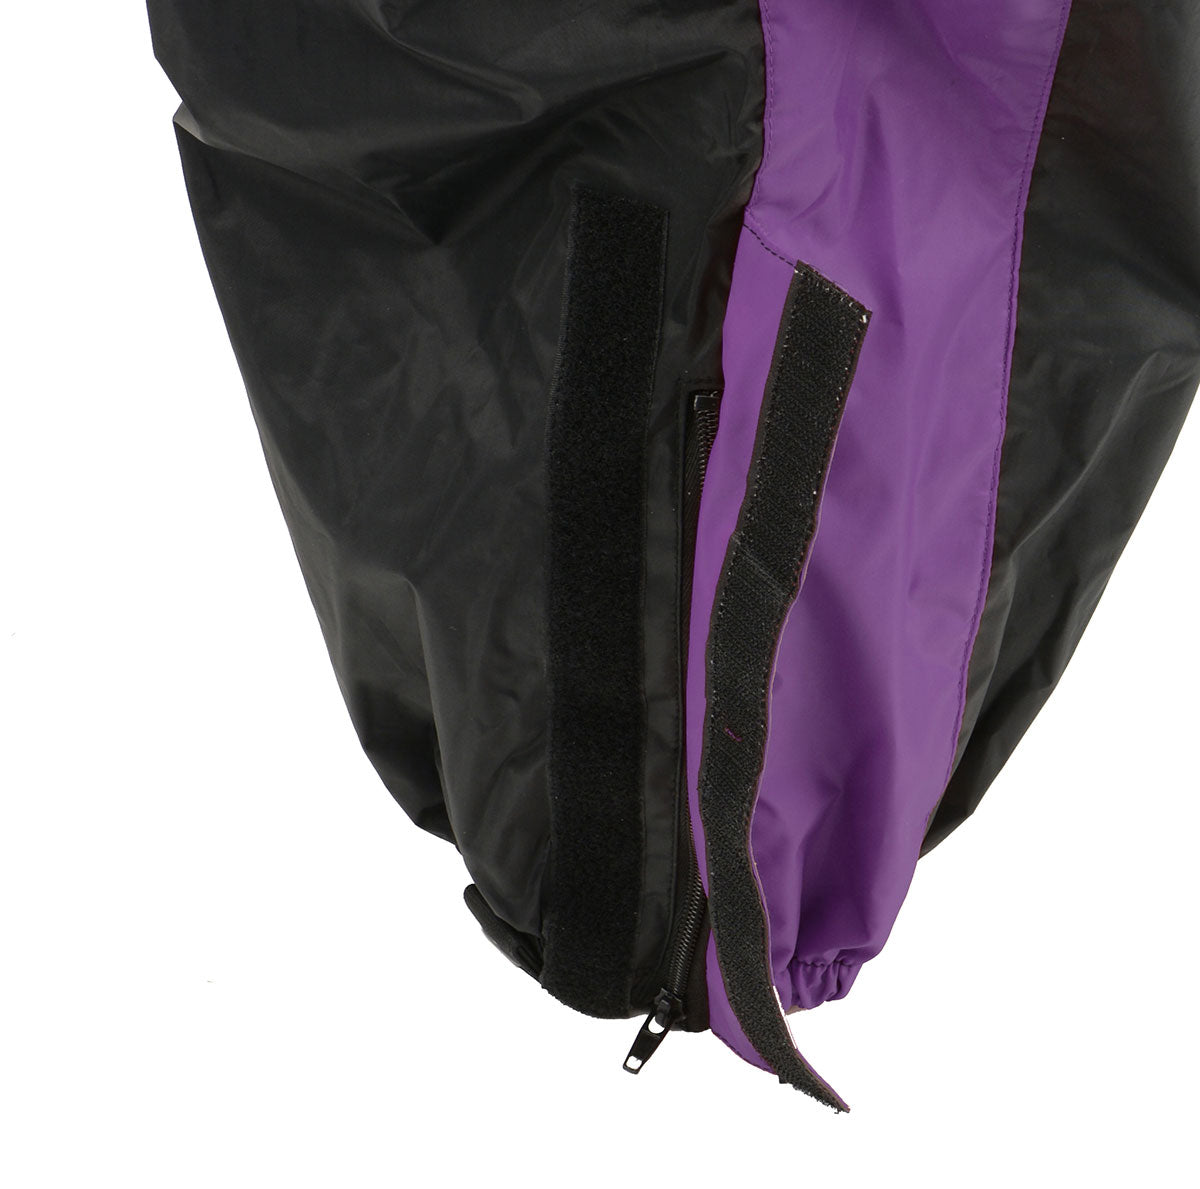 NexGen Ladies XS5001 Black and Purple Water Proof Rain Suit with Reflective Piping